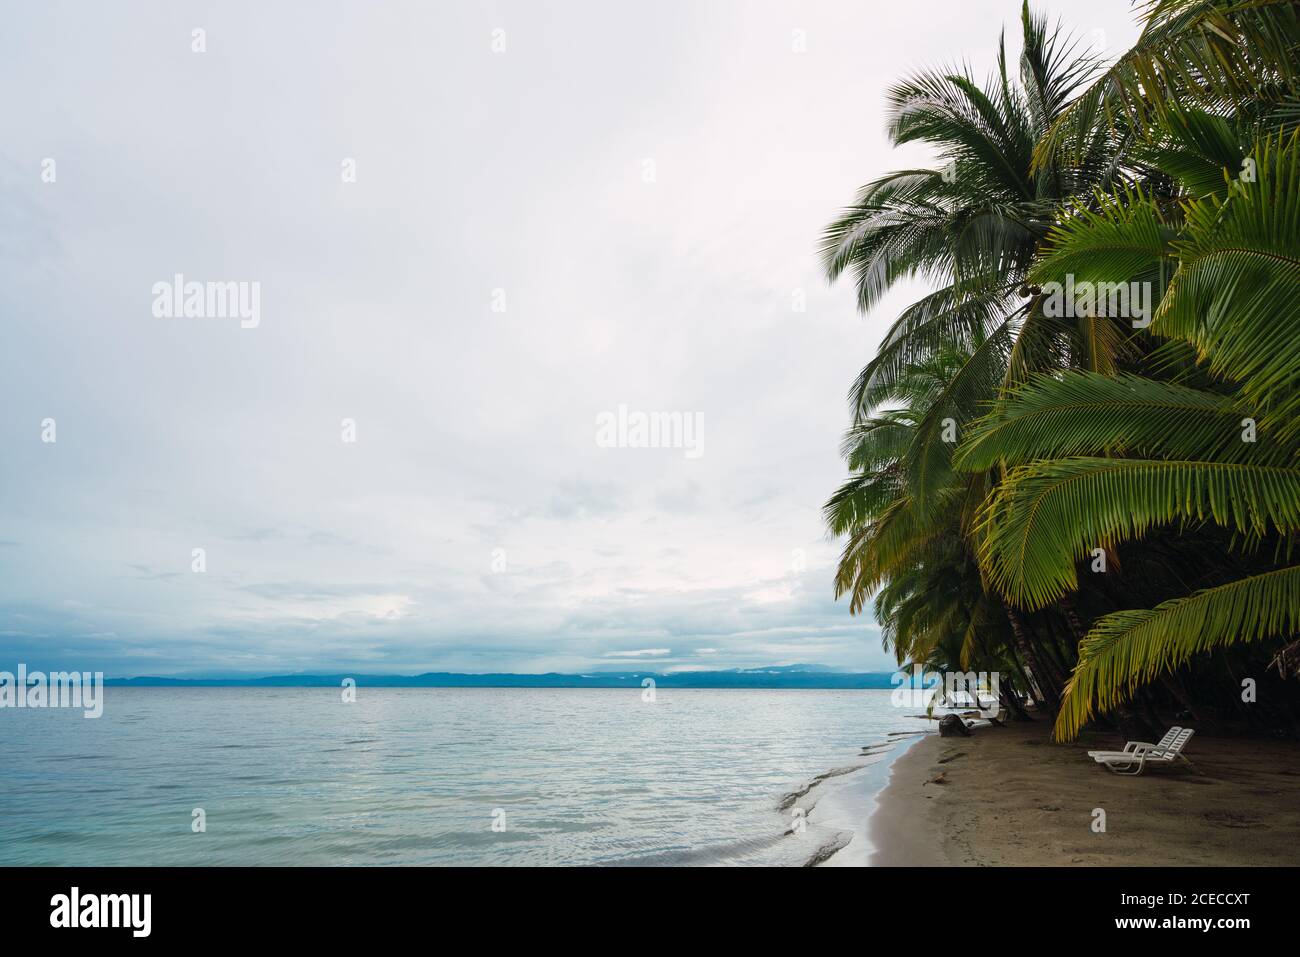 View of lush green palm trees on sandy beach of Bocas del Toro island and turquoise calm water, Pamana Stock Photo